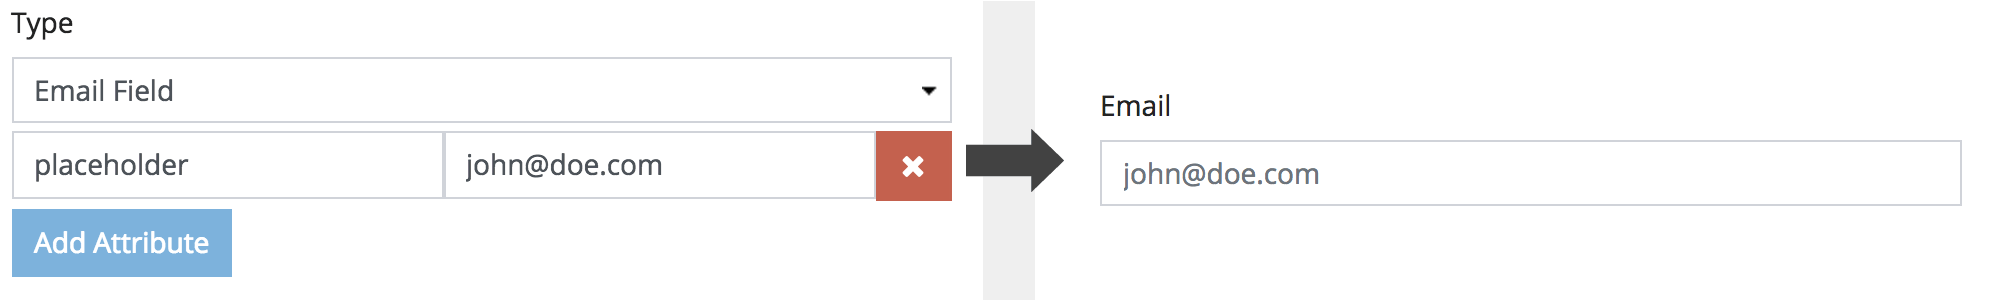 Email Field